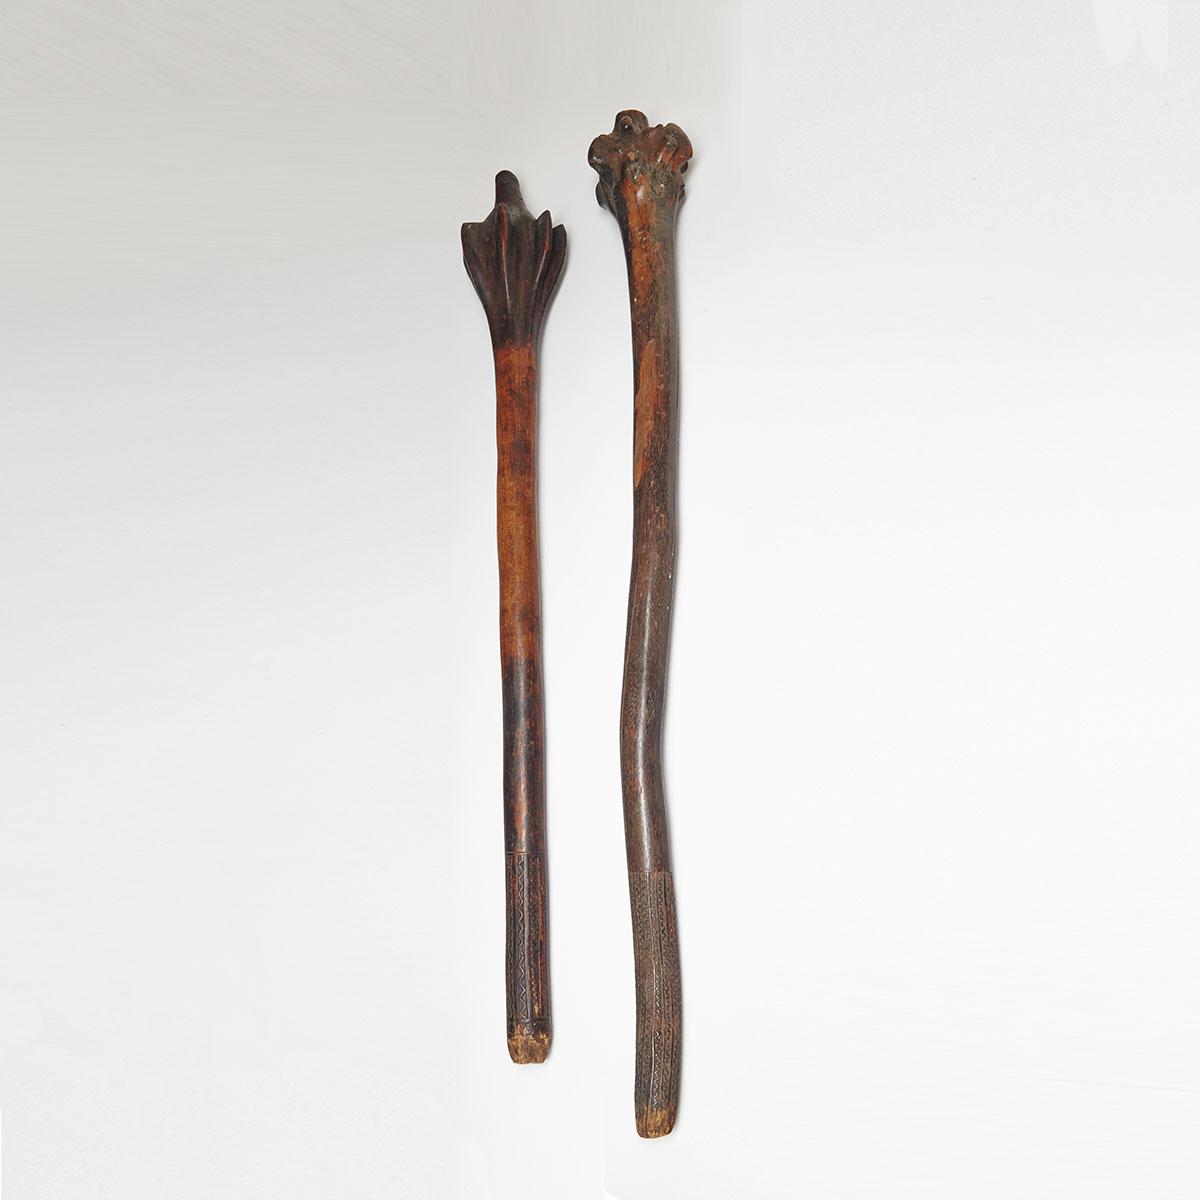 Two Fiji Islands Root Stock Clubs, 19th century